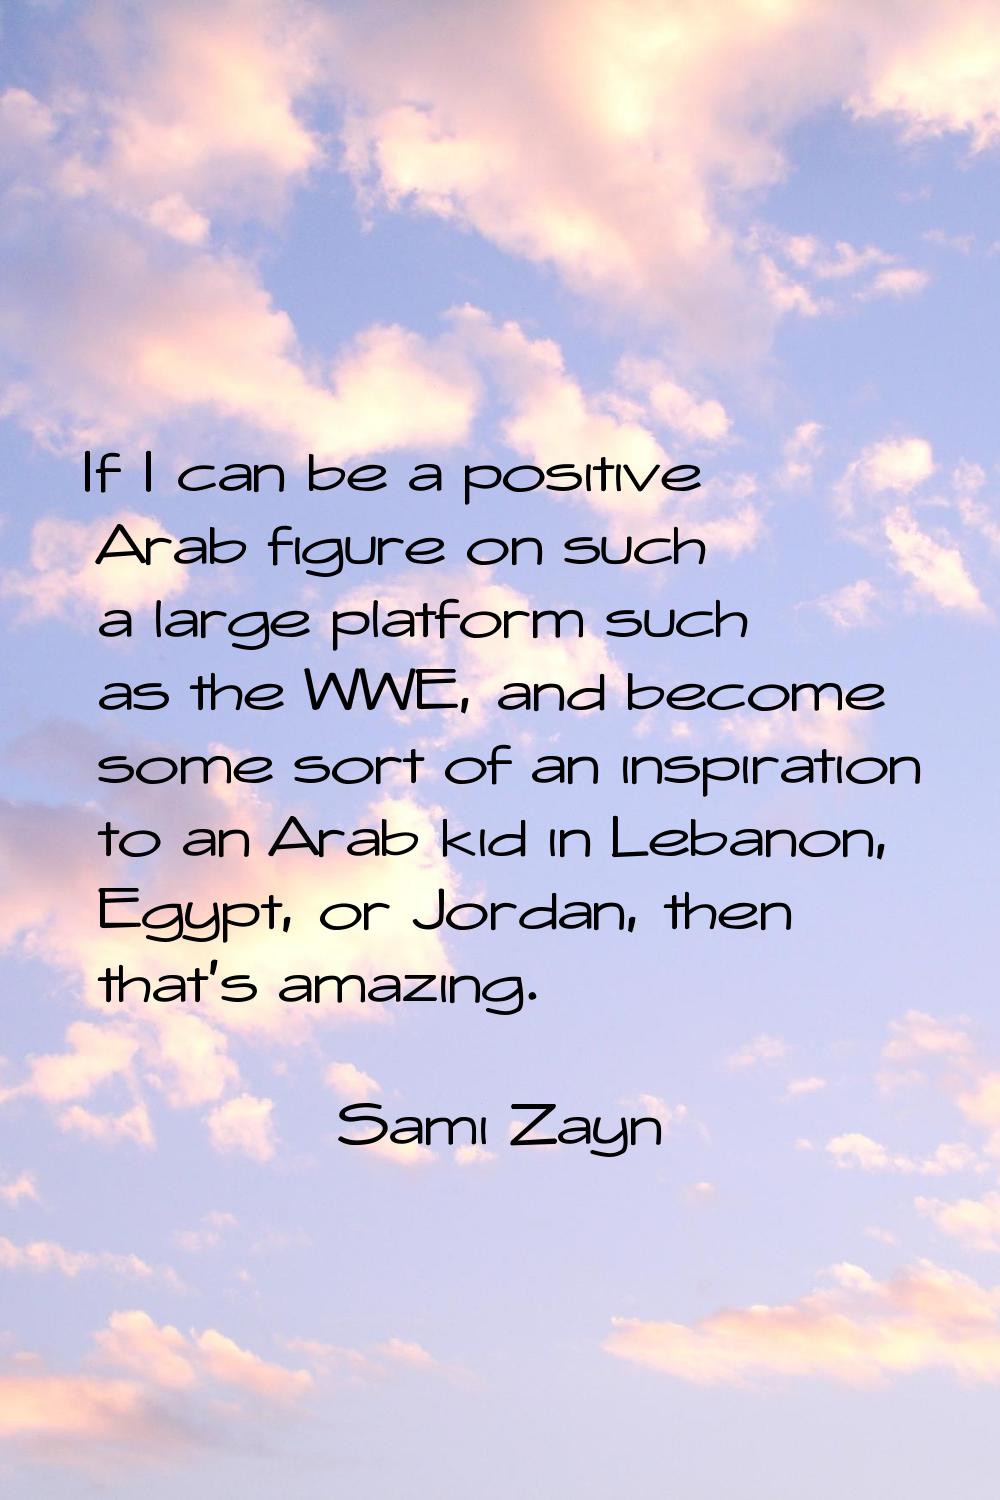 If I can be a positive Arab figure on such a large platform such as the WWE, and become some sort o